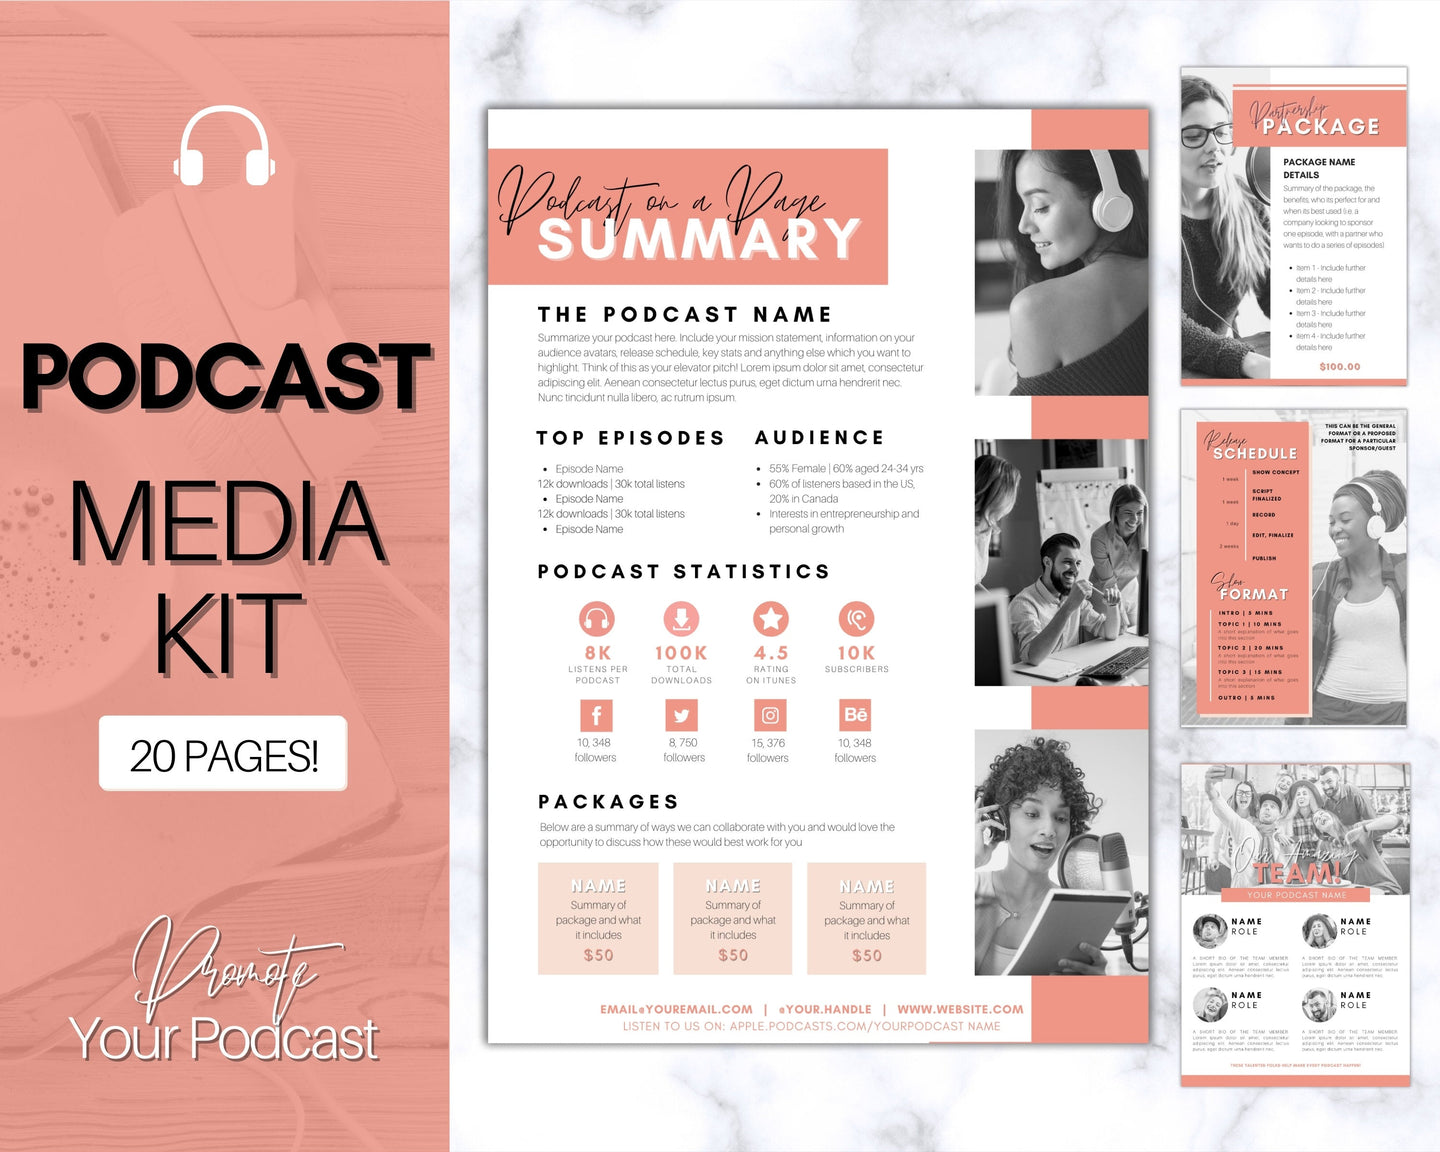 Podcast MEDIA KIT Template! Editable Canva Press Kit, Business Pitch, Rate Sheet Card, Podcasters, Planner, Influencer, Blogger, Price List | 20 Page Pink